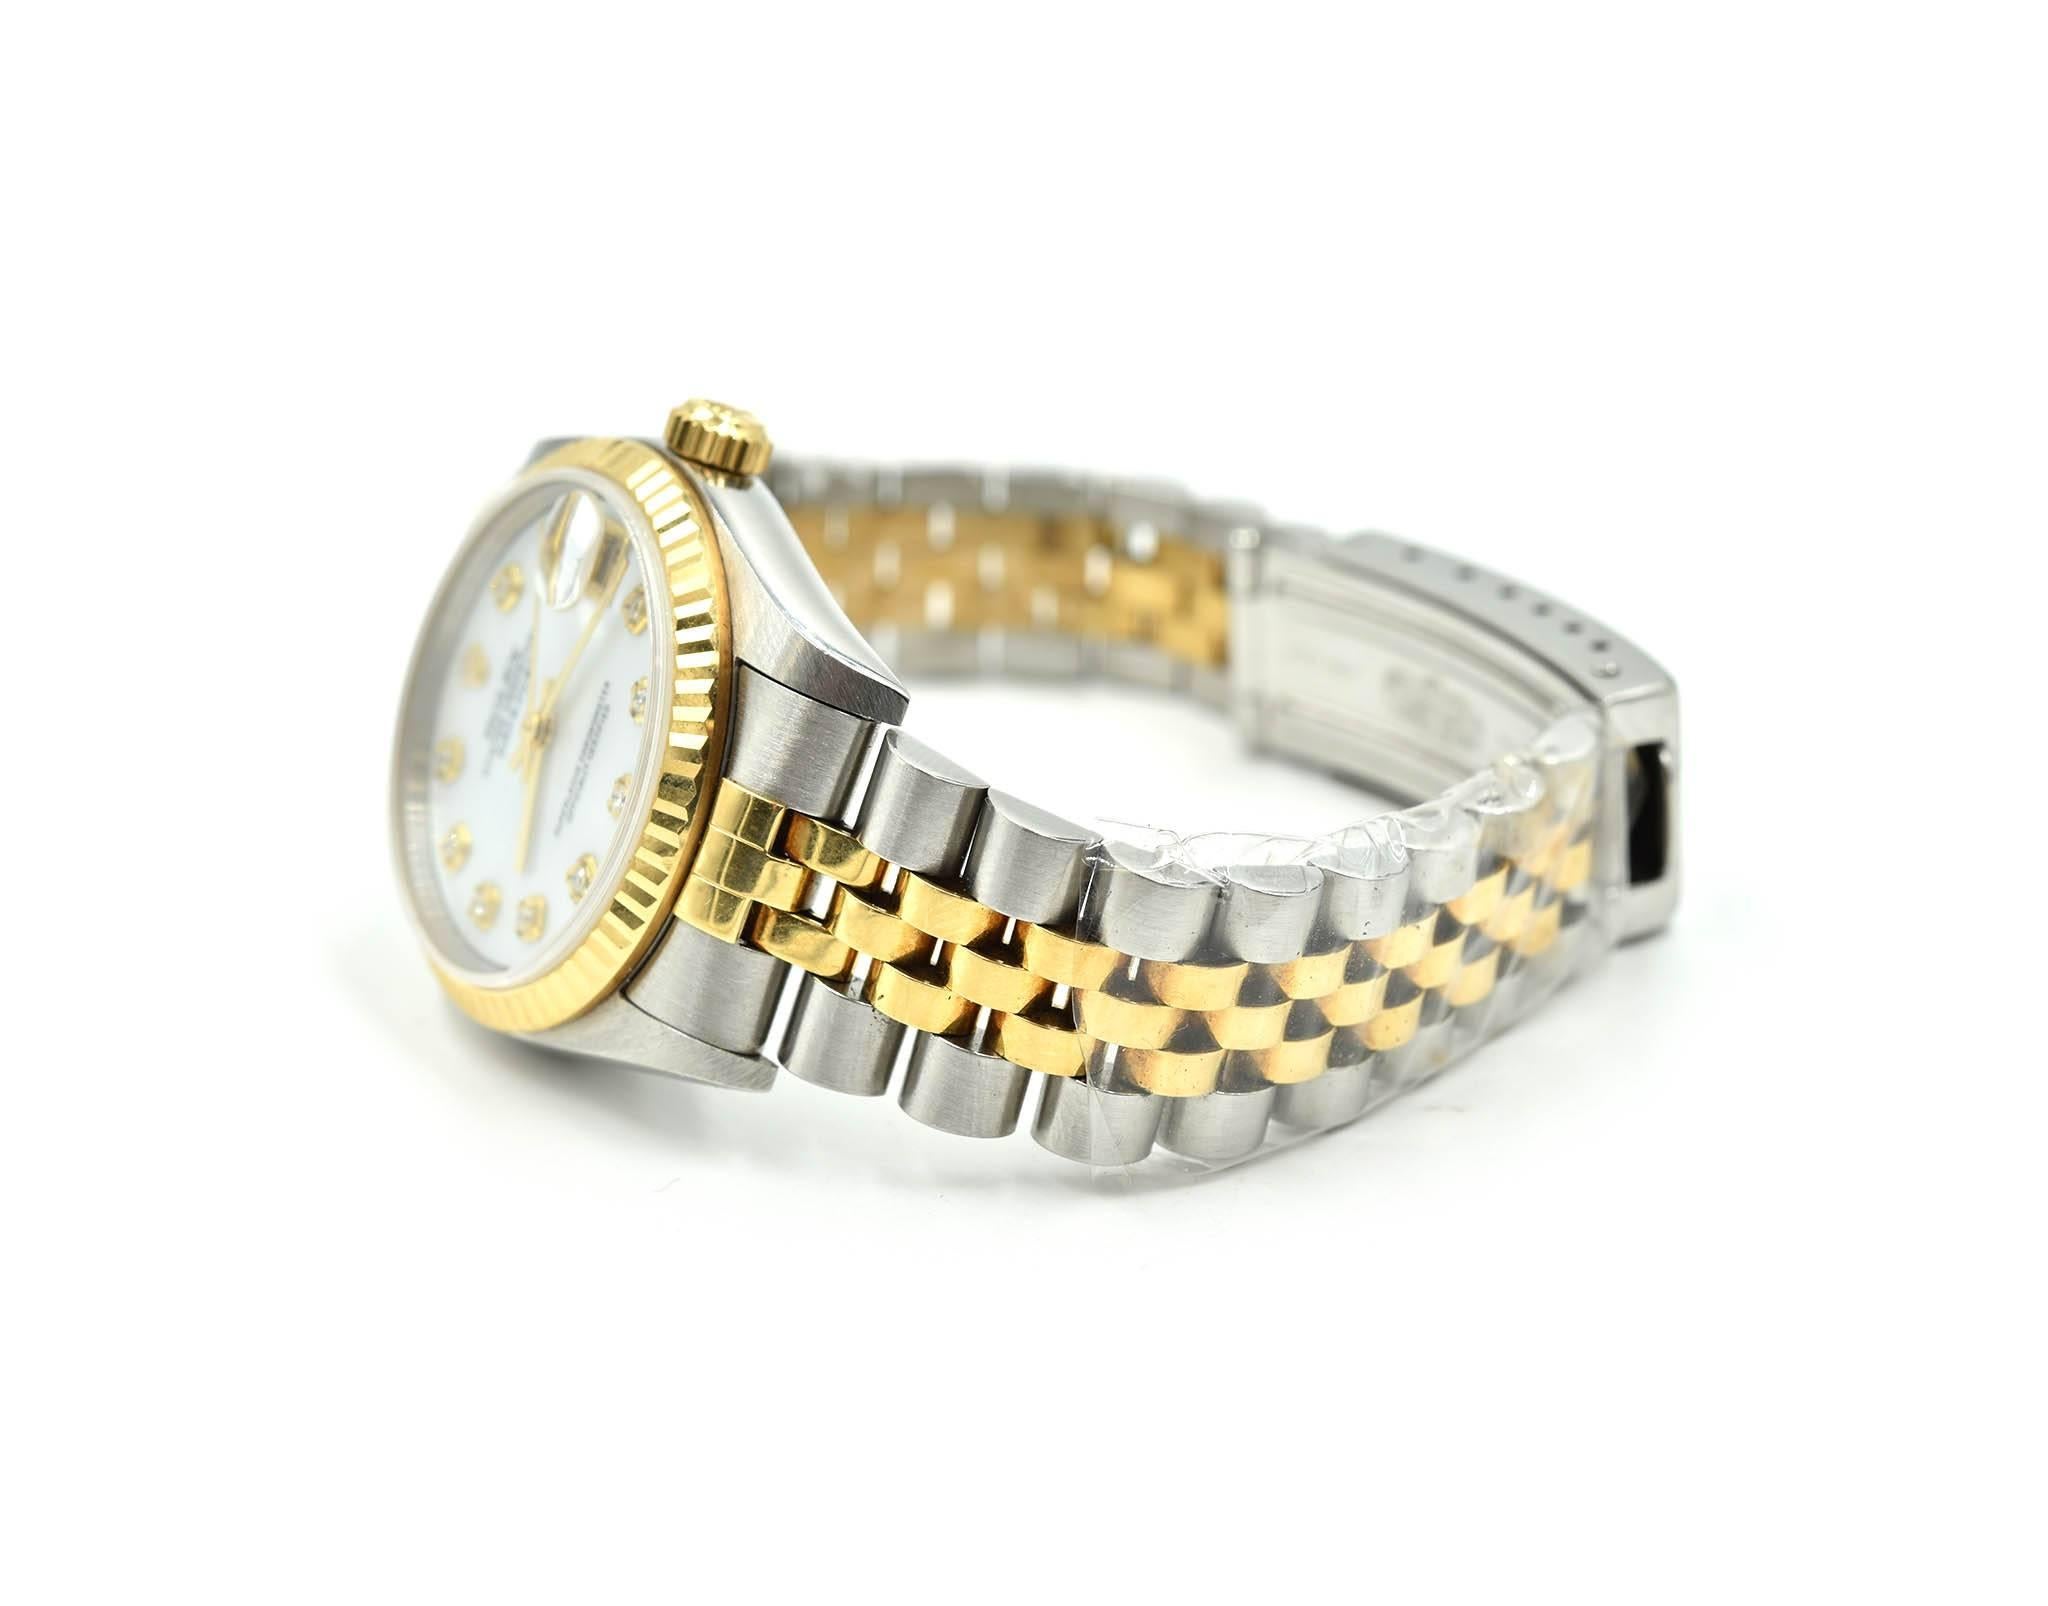 Women's Rolex Ladies Yellow Gold Stainless Steel Datejust Automatic Wristwatch Ref 79173